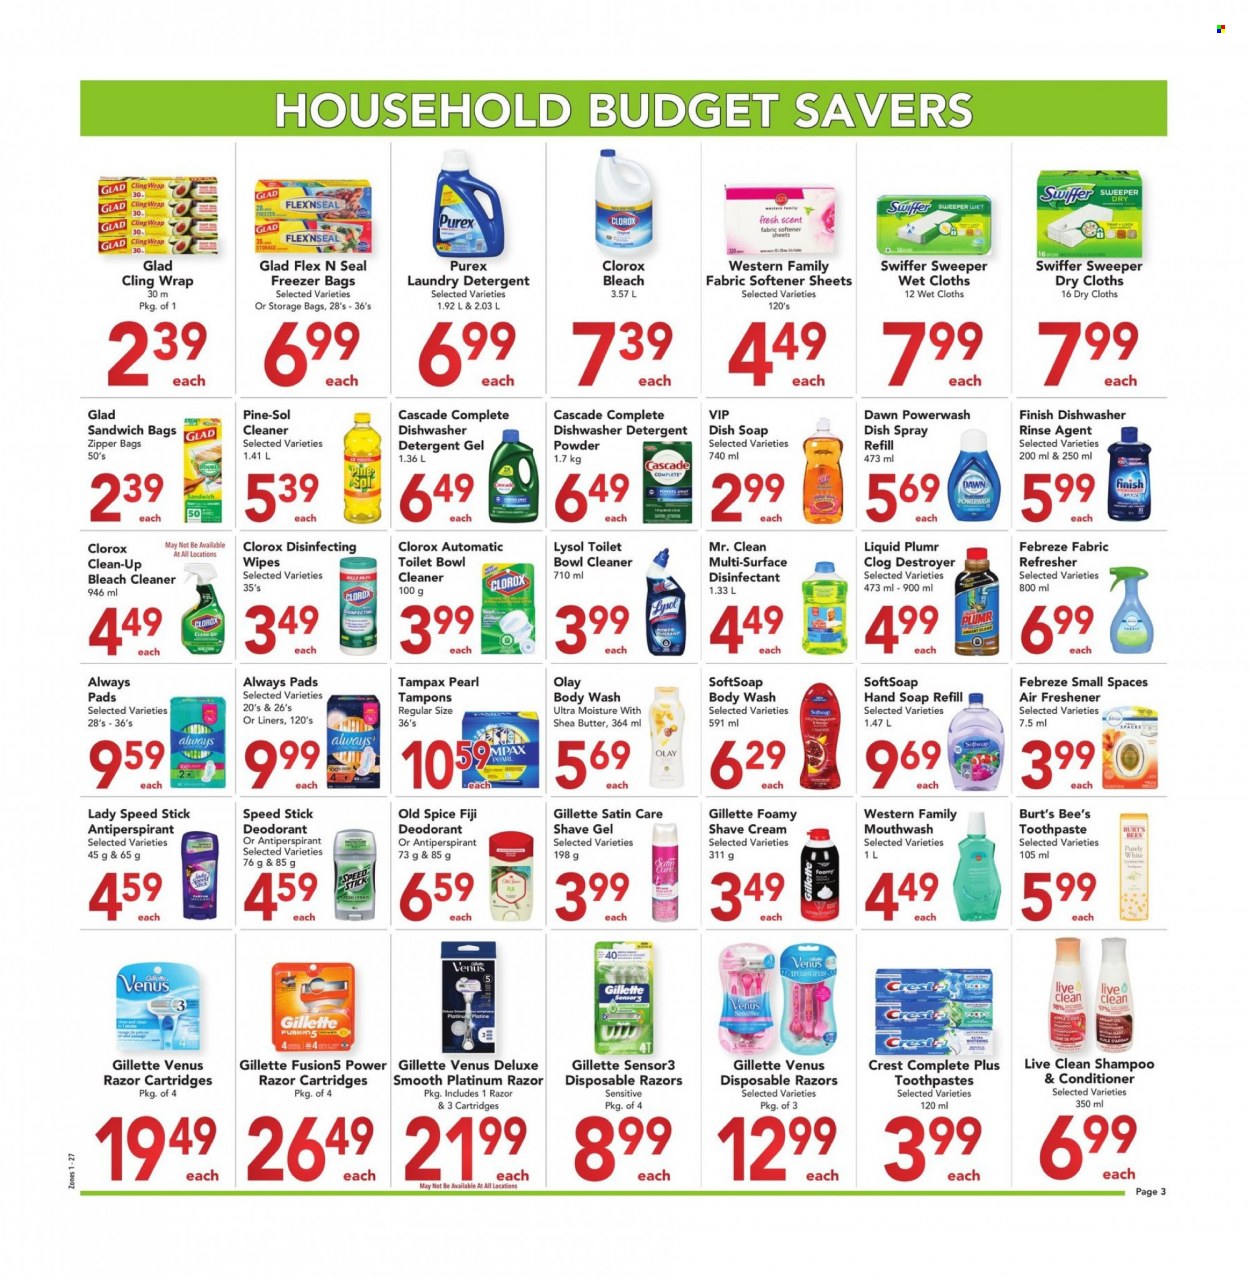 thumbnail - Buy-Low Foods Flyer - April 24, 2022 - May 21, 2022 - Sales products - spice, wipes, Febreze, cleaner, bleach, Lysol, Clorox, Pine-Sol, Swiffer, fabric softener, laundry detergent, laundry powder, washing gel, Cascade, Purex, body wash, Softsoap, hand soap, toothpaste, mouthwash, Crest, Always pads, tampons, Olay, conditioner, refresher, shea butter, anti-perspirant, Speed Stick, Gillette, shave gel, Venus, shave cream, disposable razor, bag, detergent, shampoo, Tampax, Old Spice, desinfection, deodorant. Page 3.